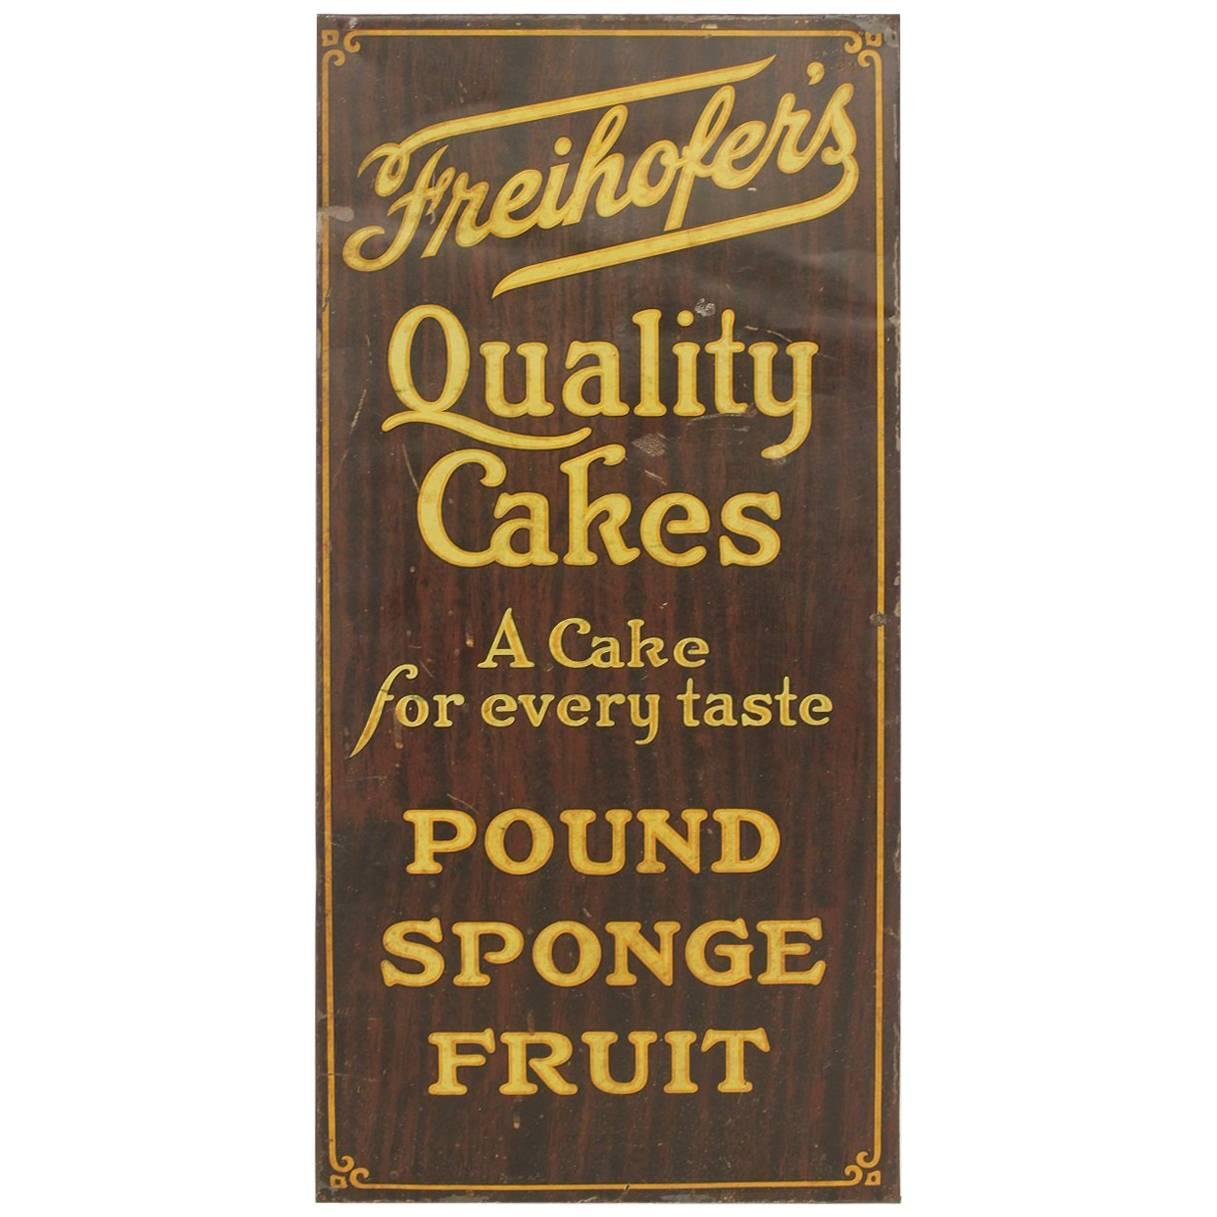 1900s Tin Advertising Sign "Freihofer's Quality Cakes" For Sale